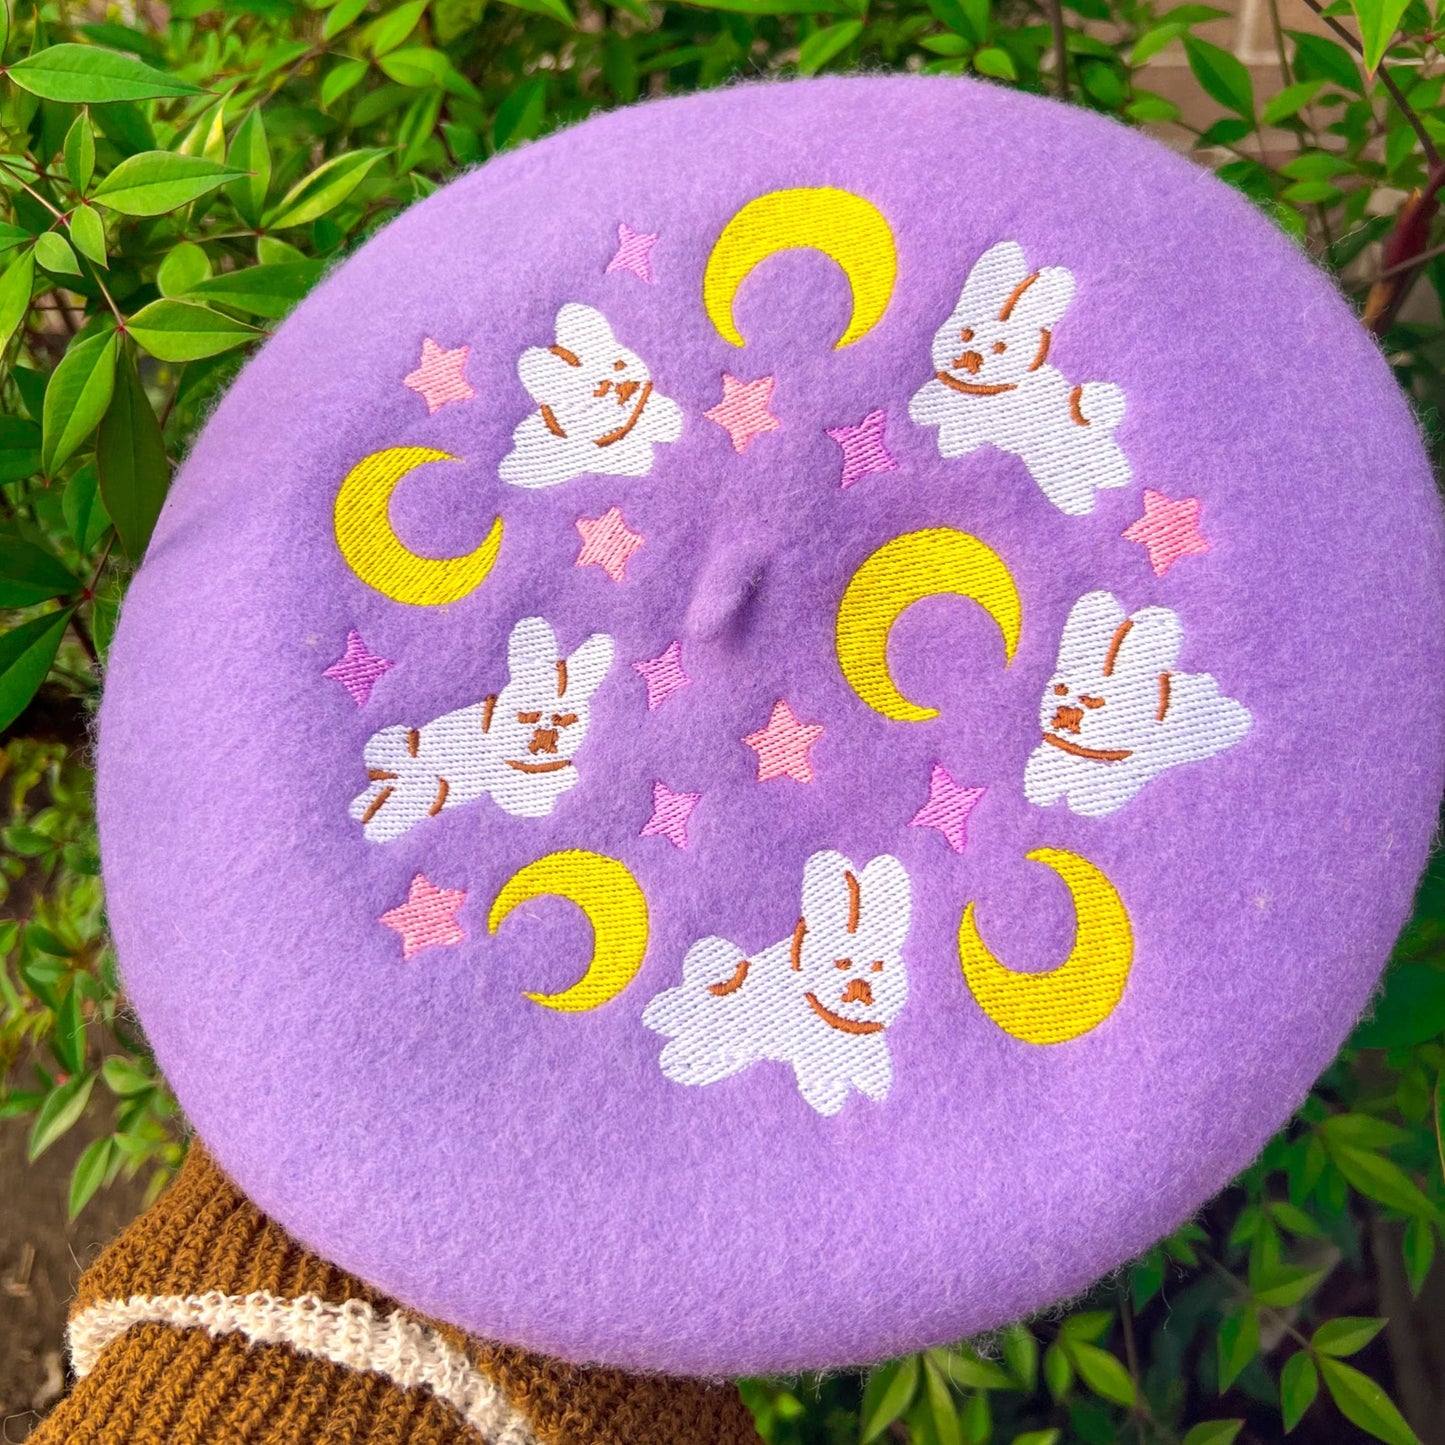 Moon Bunnies Embroidered Beret!